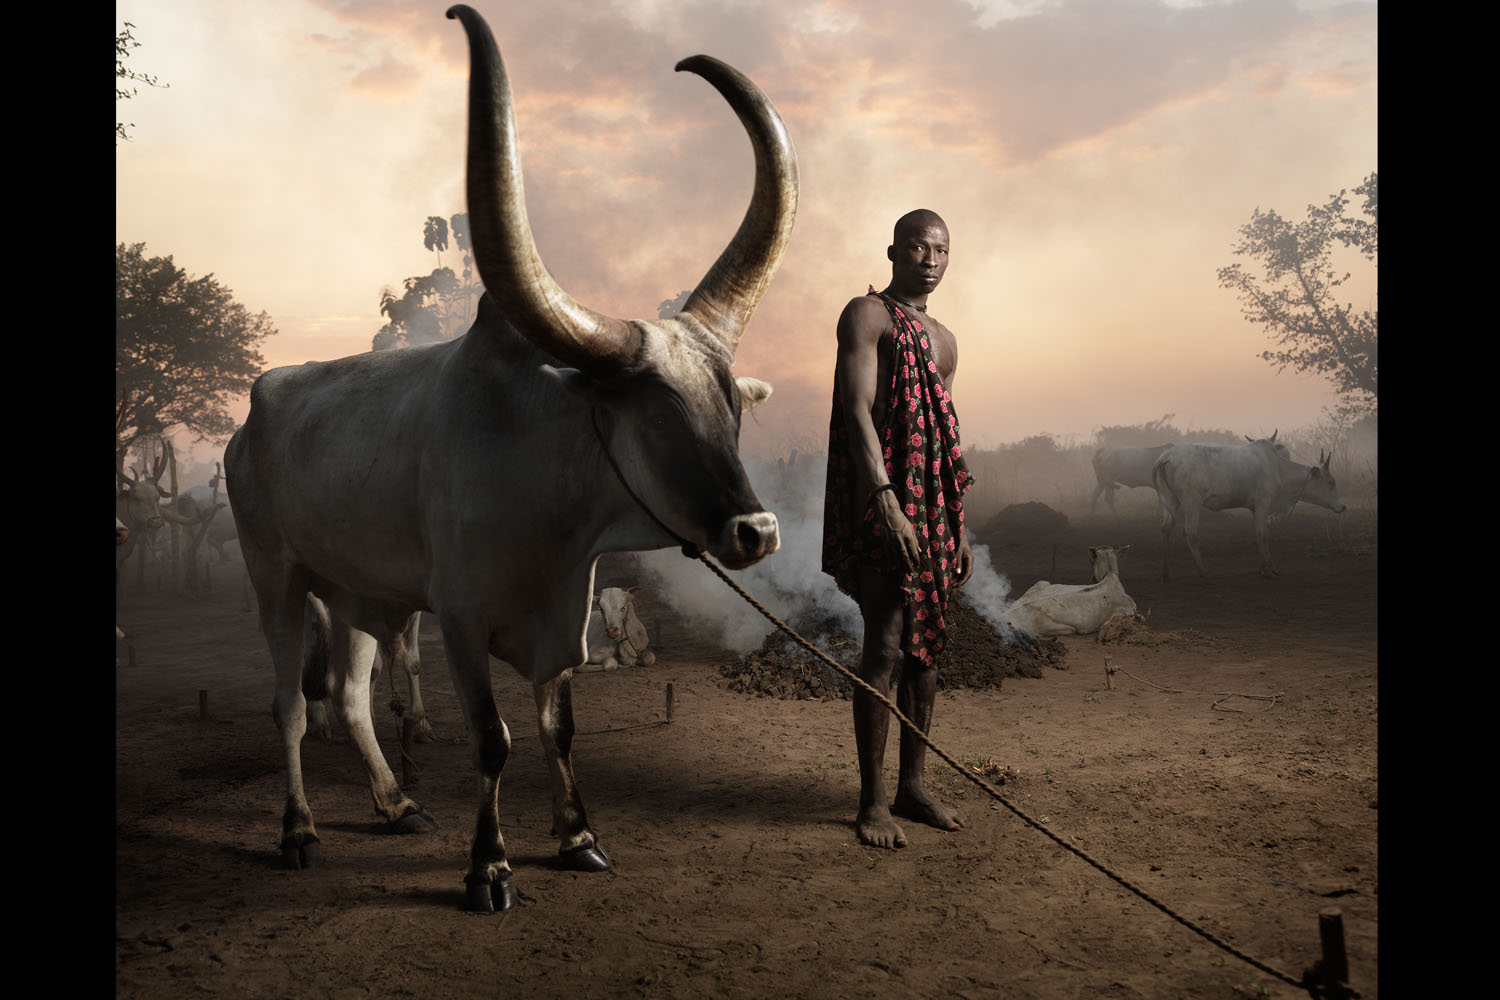 Mundari tribe members are especially vulnerable to the threat of land mines and other unexploded ordnance since they move around the country frequently to feed and water their cattle.